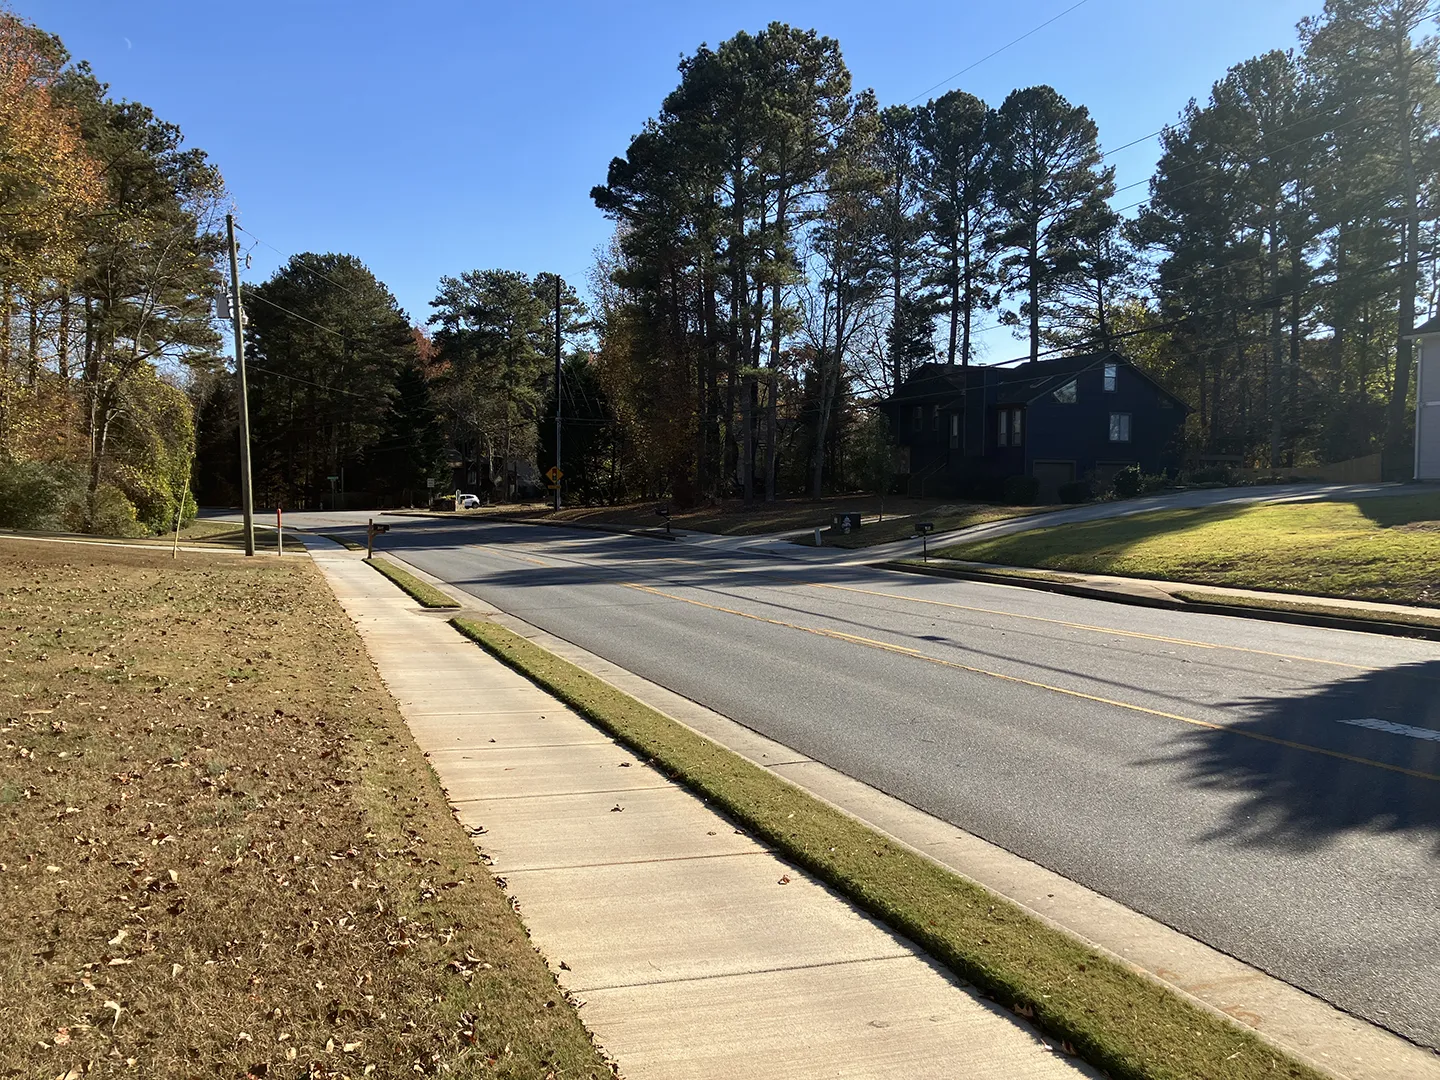 Our team has worked on sidewalk connectivity projects within Gwinnett County, including one along Old Peachtree Road in Johns Creek.